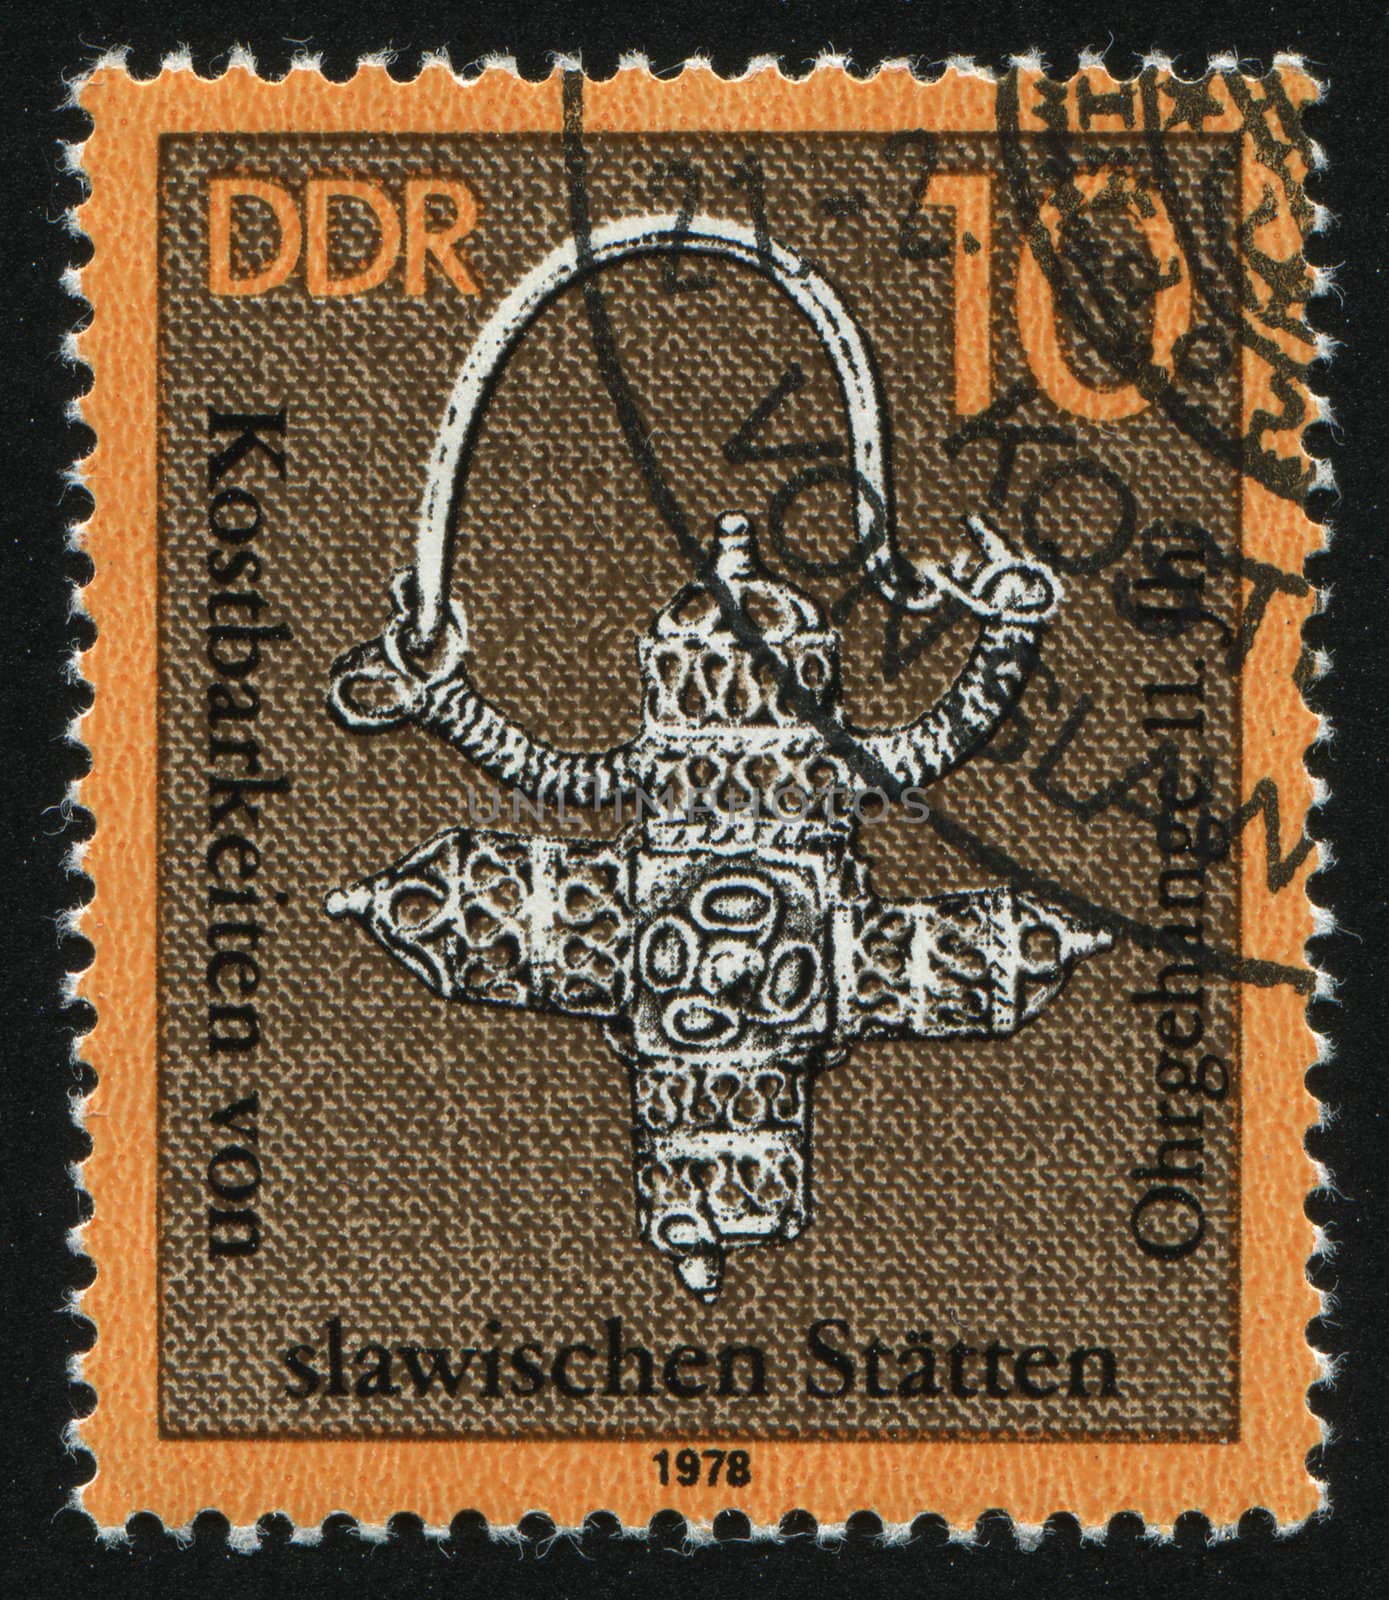 GERMANY- CIRCA 1978: stamp printed by Germany, shows Archaeological Artifacts: Earring Century, circa 1978.